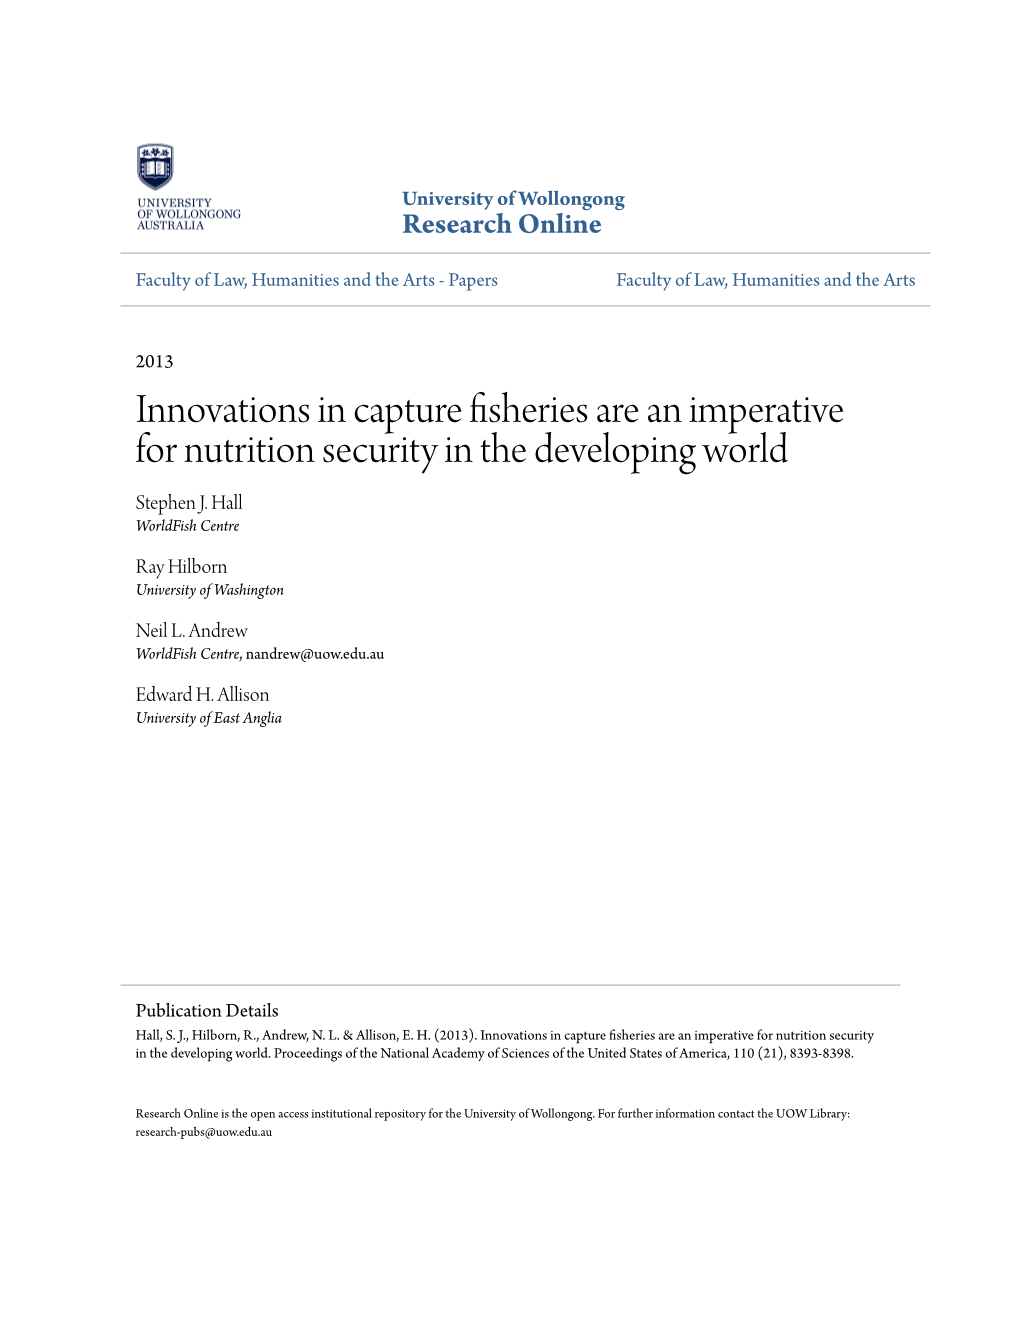 Innovations in Capture Fisheries Are an Imperative for Nutrition Security in the Developing World Stephen J